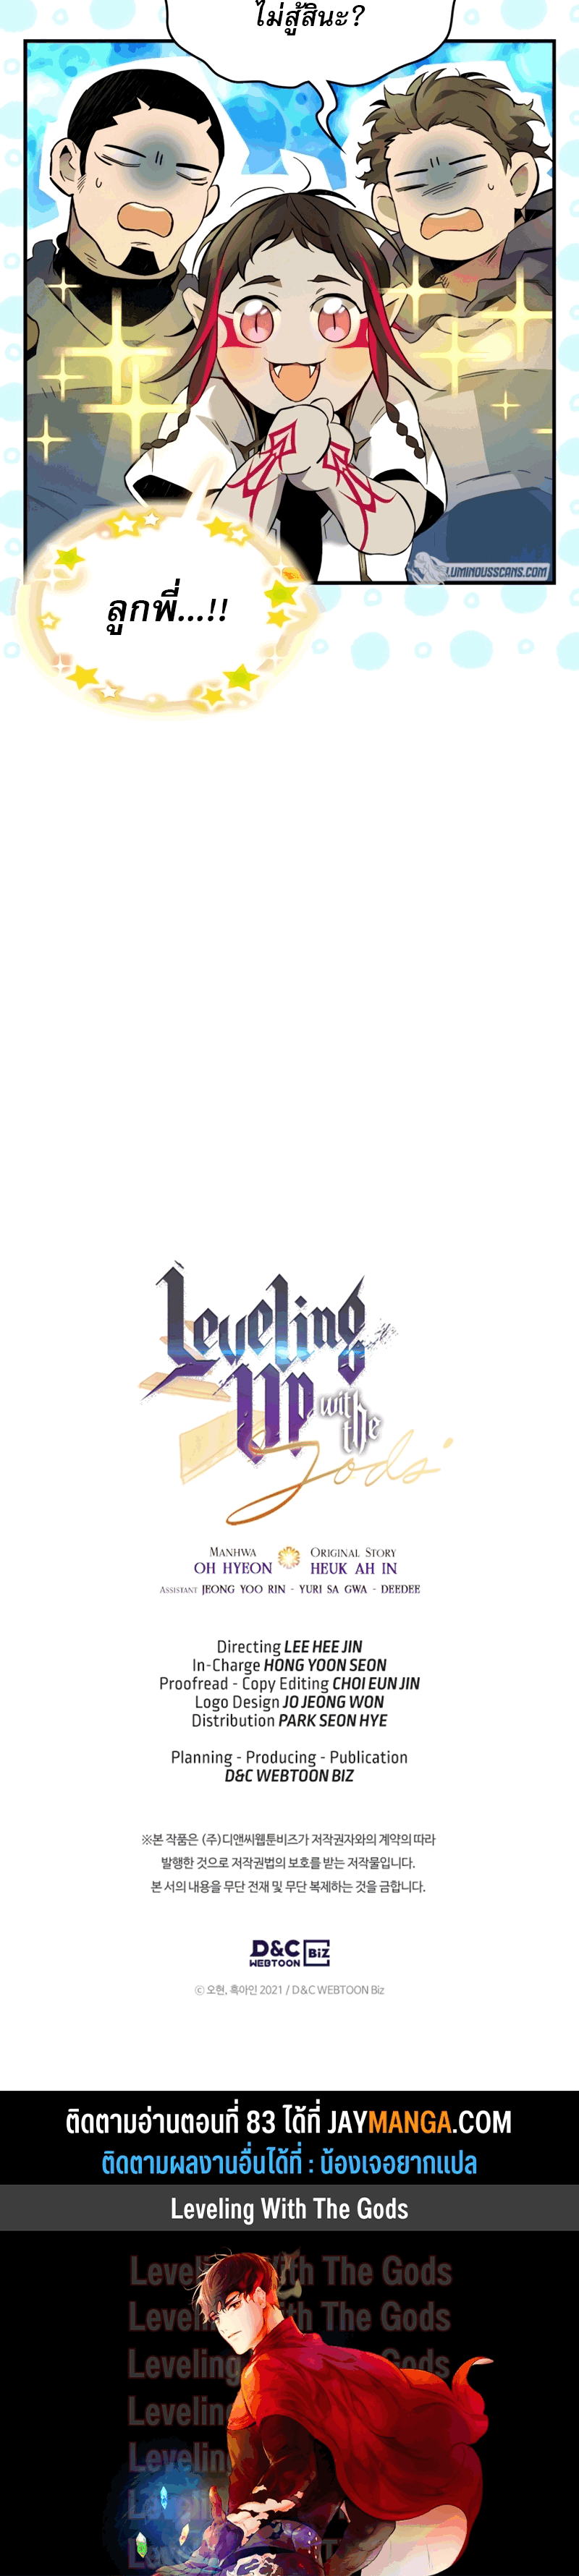 level up with the gods 82.26